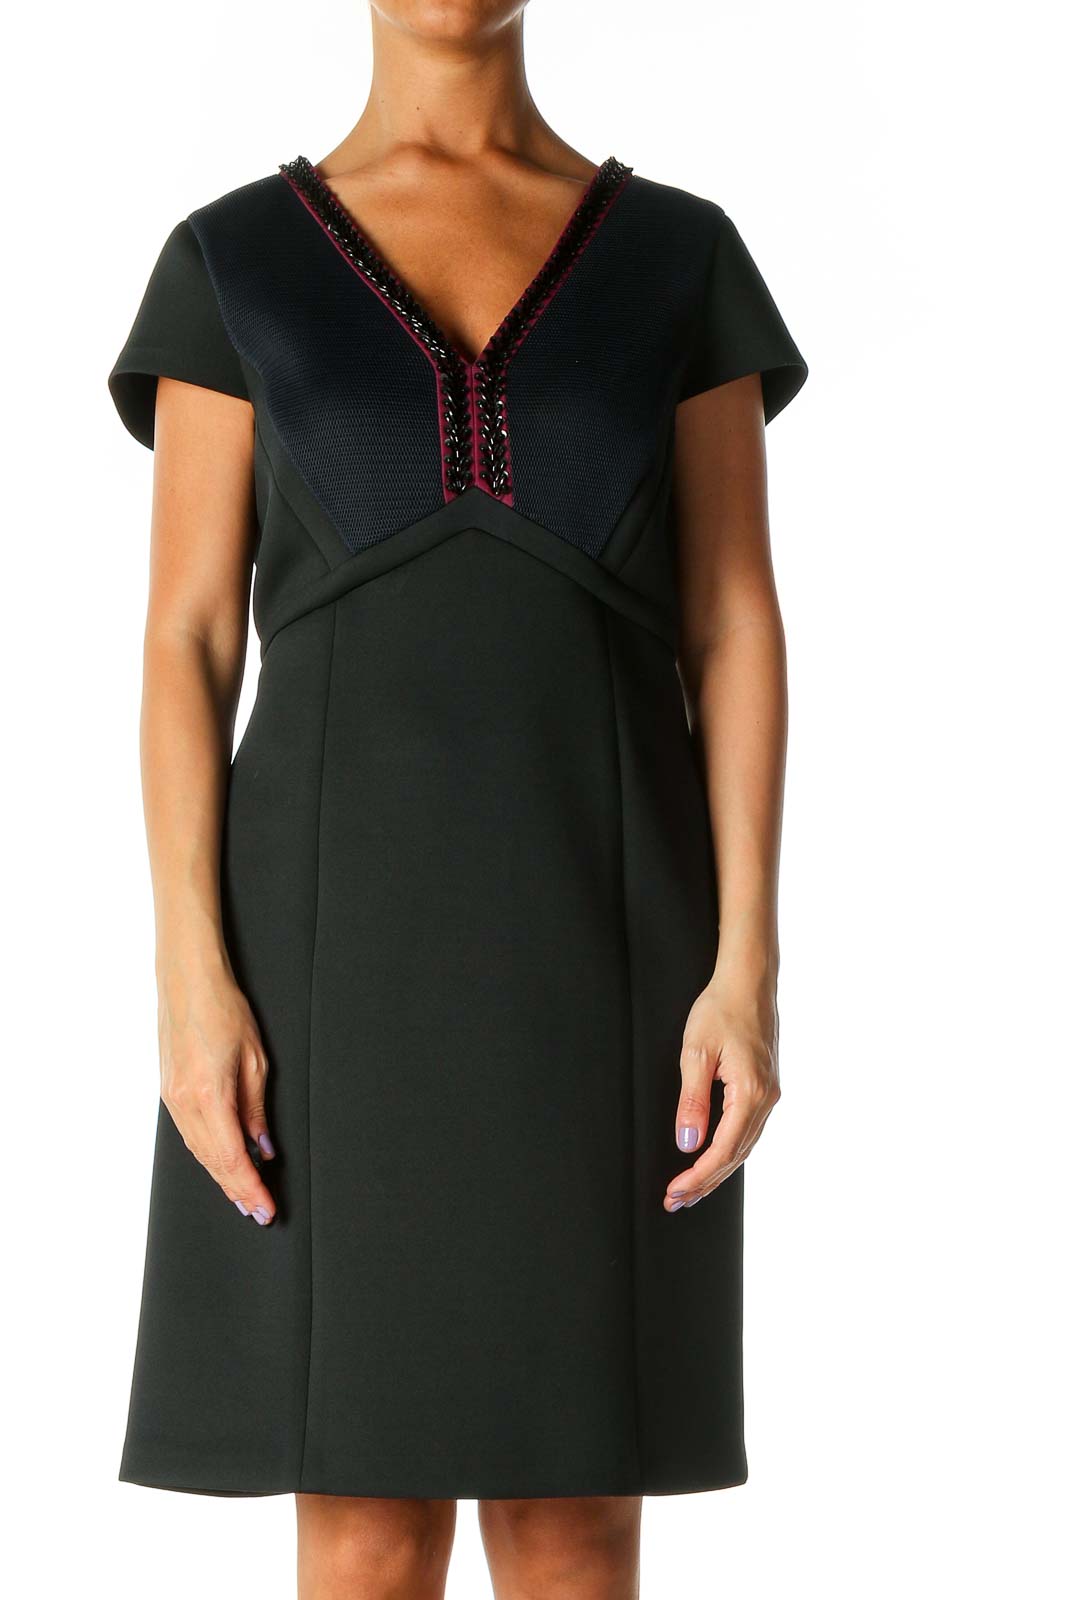 Black Textured Chic Shift Dress Front